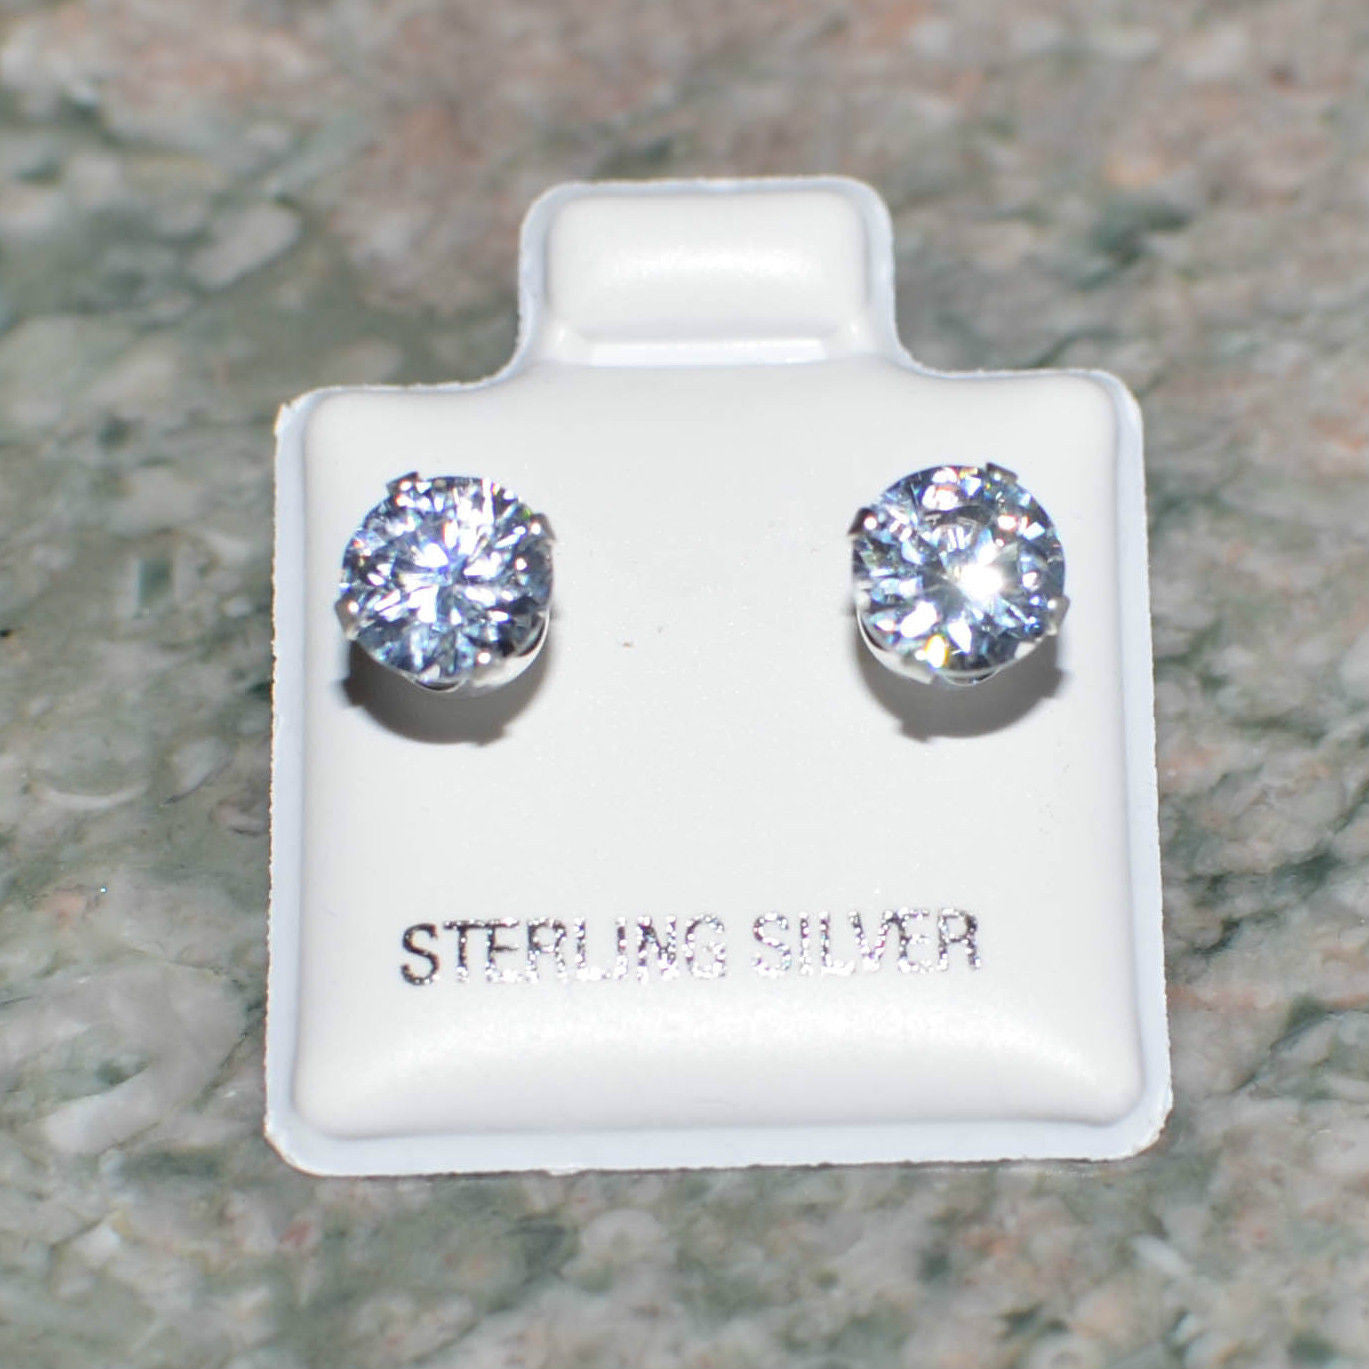 Is Sterling Silver Hypoallergenic?